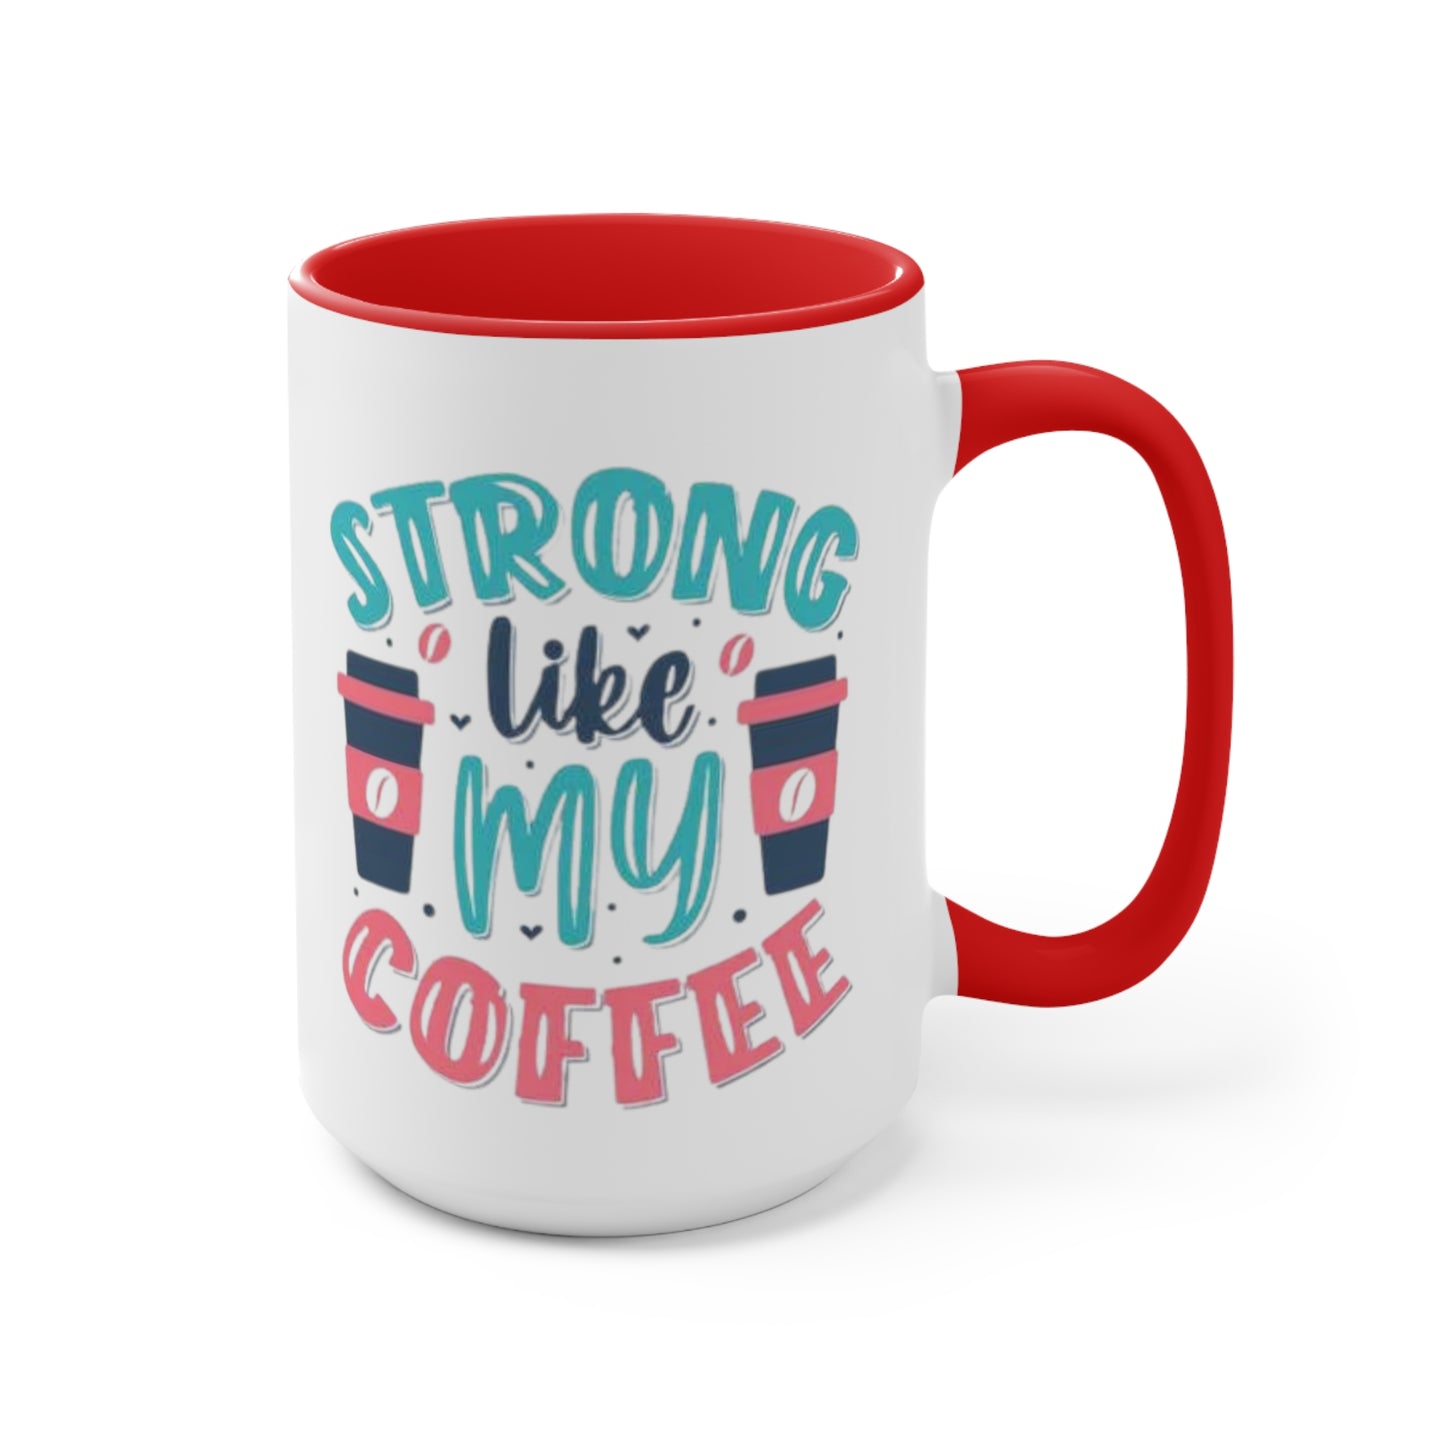 Strong Like My Coffee Mug, teacher gift, coworker gift, unique gift, gift for mom, gift for dad, funny gift, sister gift, motivation gift